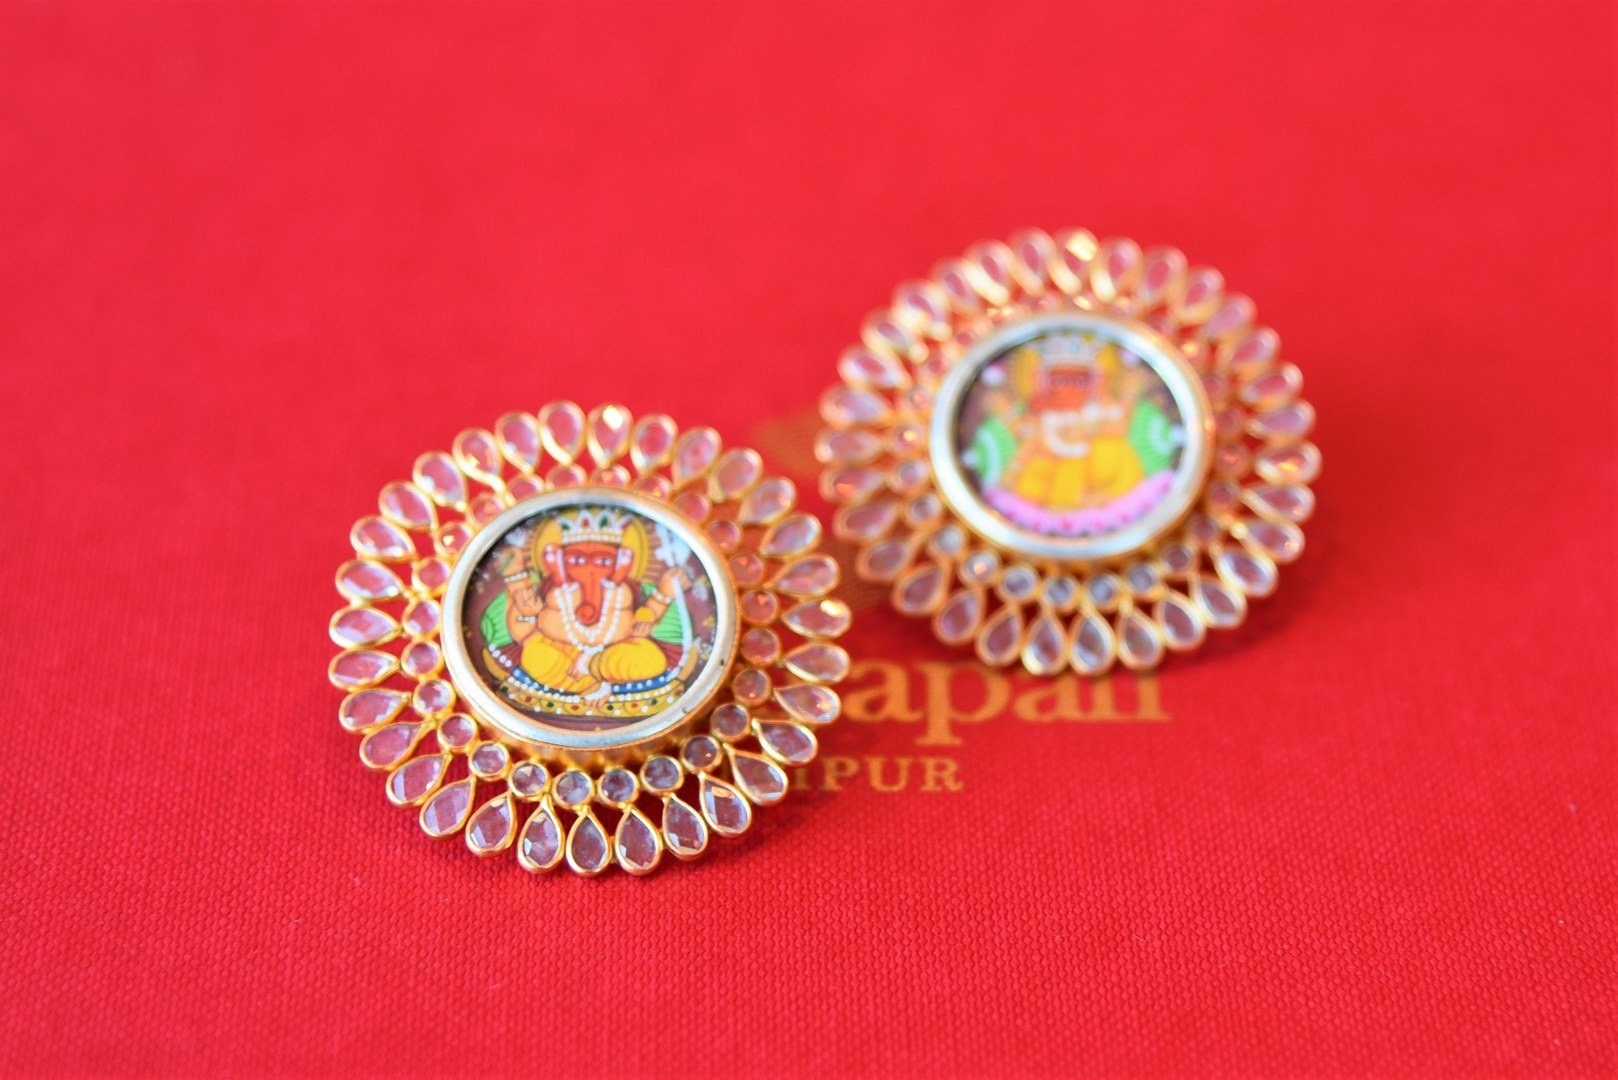 Buy Amrapali ethnic silver gold plated crystal studs online in USA with Lord Ganesha painting. Add spark to your ethnic attires with beautiful Indian silver gold plated jewelry, wedding jewelry, silver gold plated necklaces from Pure Elegance Indian fashion store in USA.-flatlay